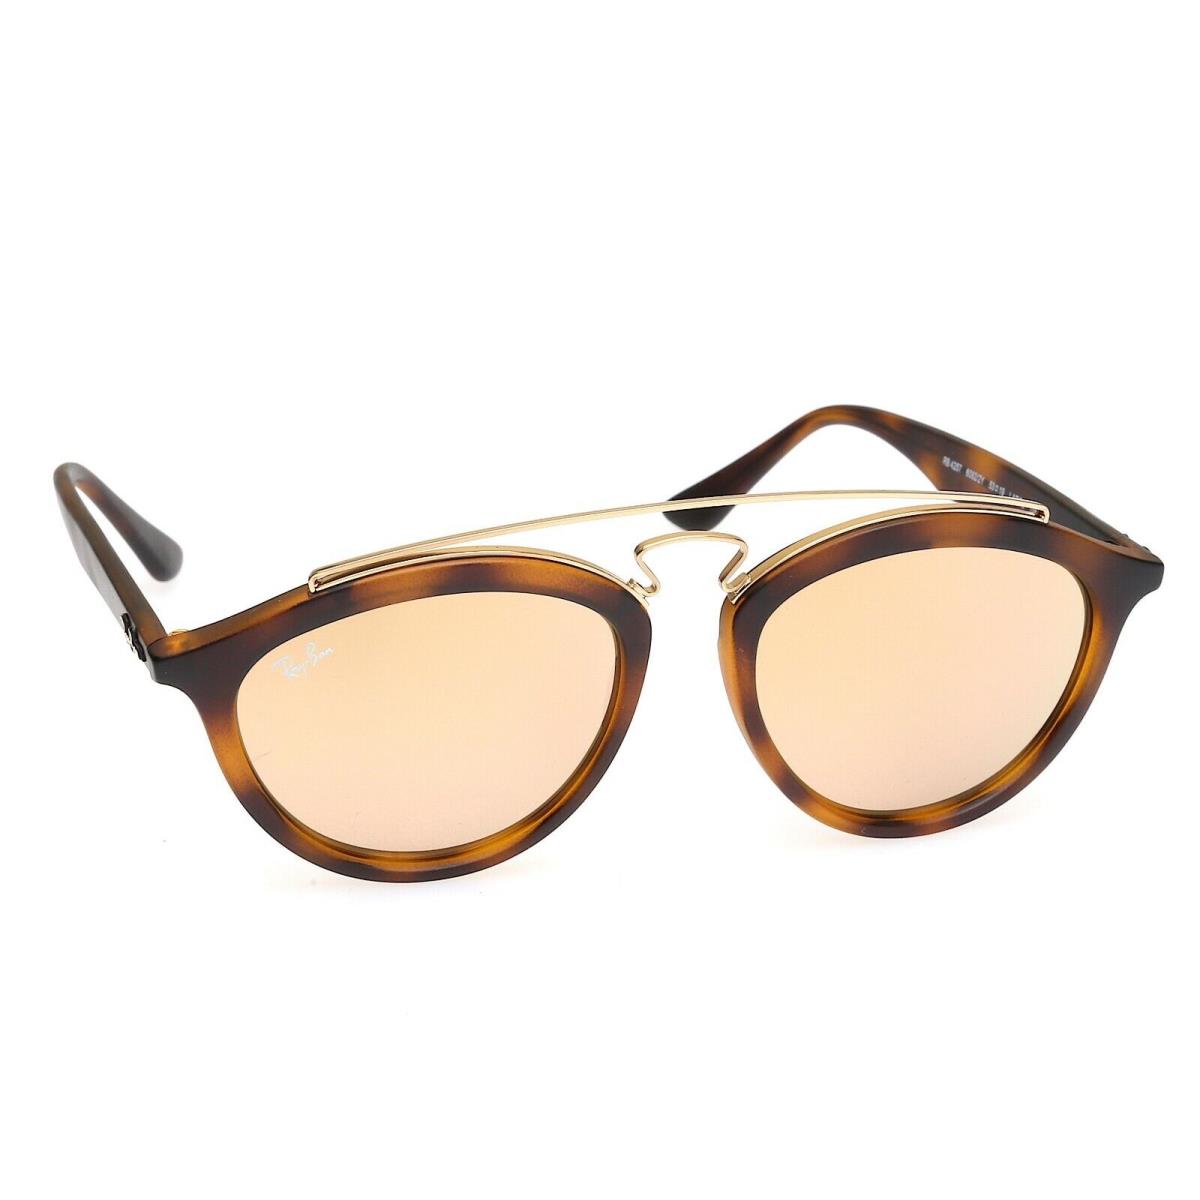 Ray Ban RB4257 Gatsby II 53-19-150 Mirrored Sunglasses S2232 - Frame: Brown, Lens: Brown